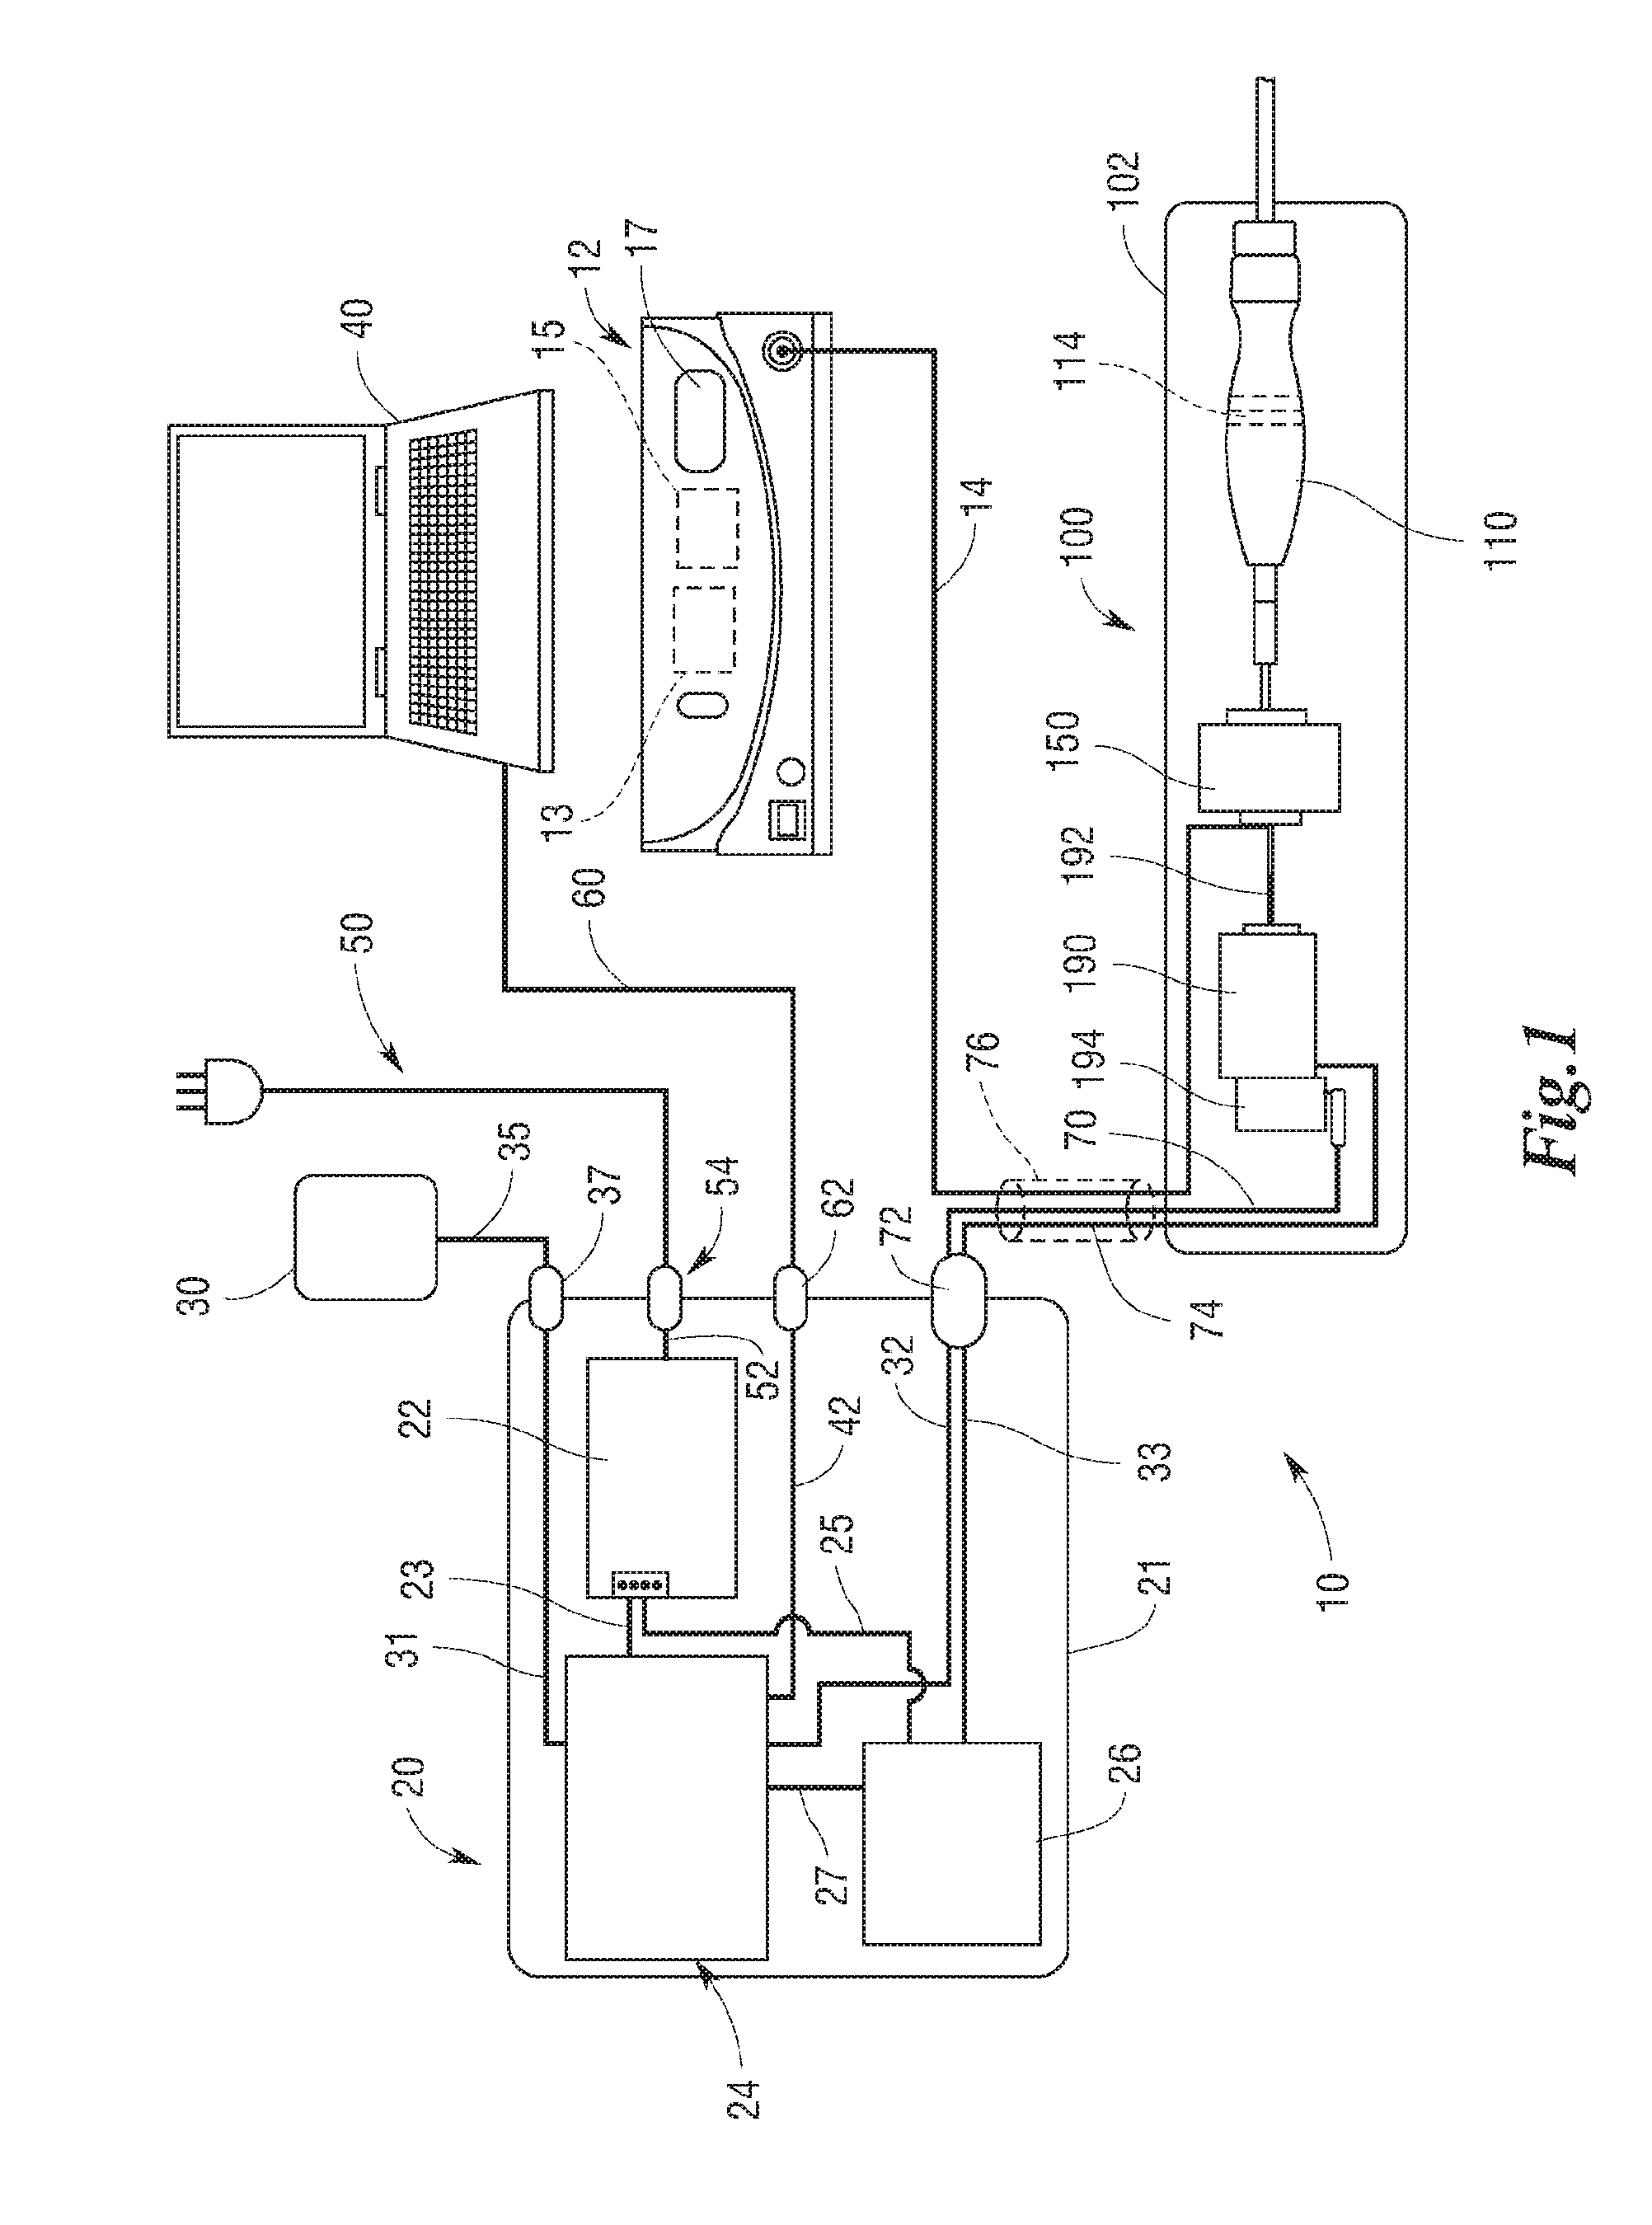 Rotatable cutting implements with friction reducing material for ultrasonic surgical instruments